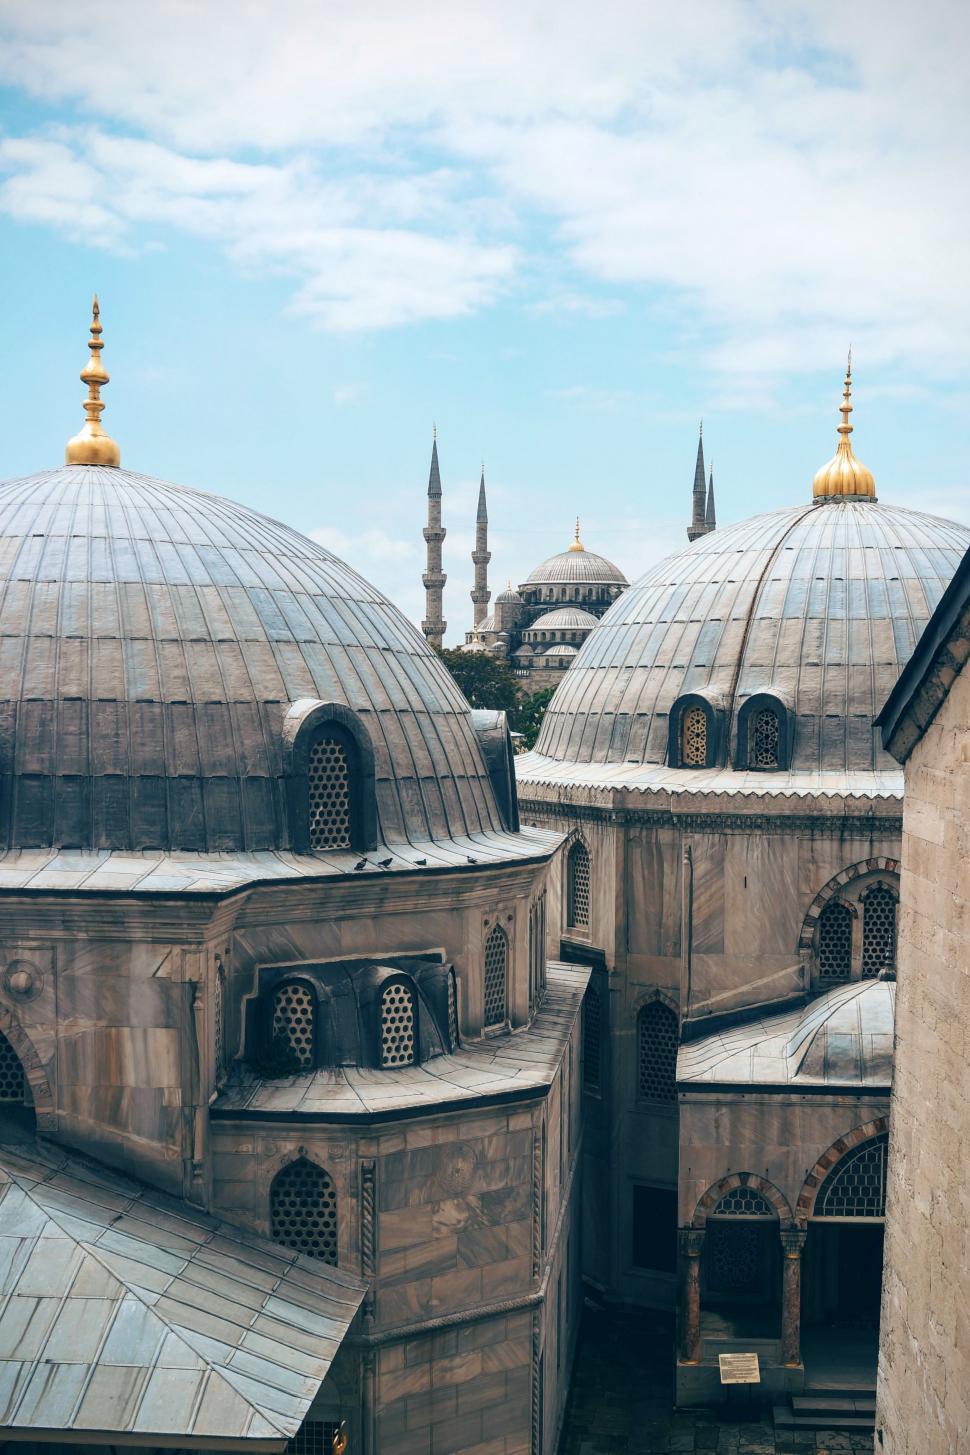 Free Image of The Blue Mosque 